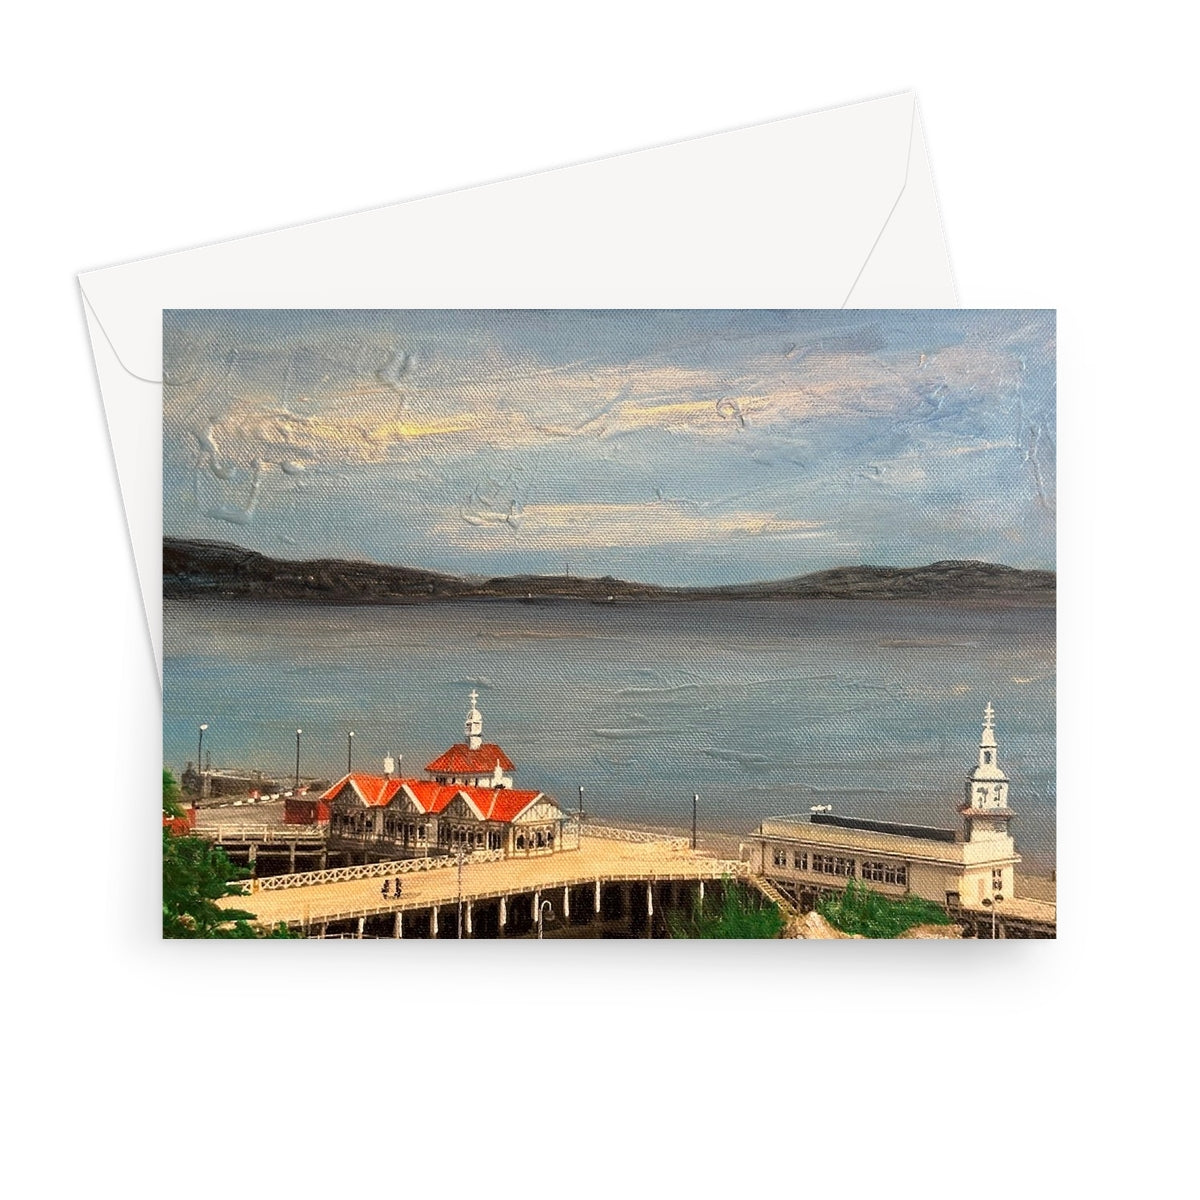 Looking From Dunoon Art Gifts Greeting Card-Stationery-River Clyde Art Gallery-7"x5"-10 Cards-Paintings, Prints, Homeware, Art Gifts From Scotland By Scottish Artist Kevin Hunter